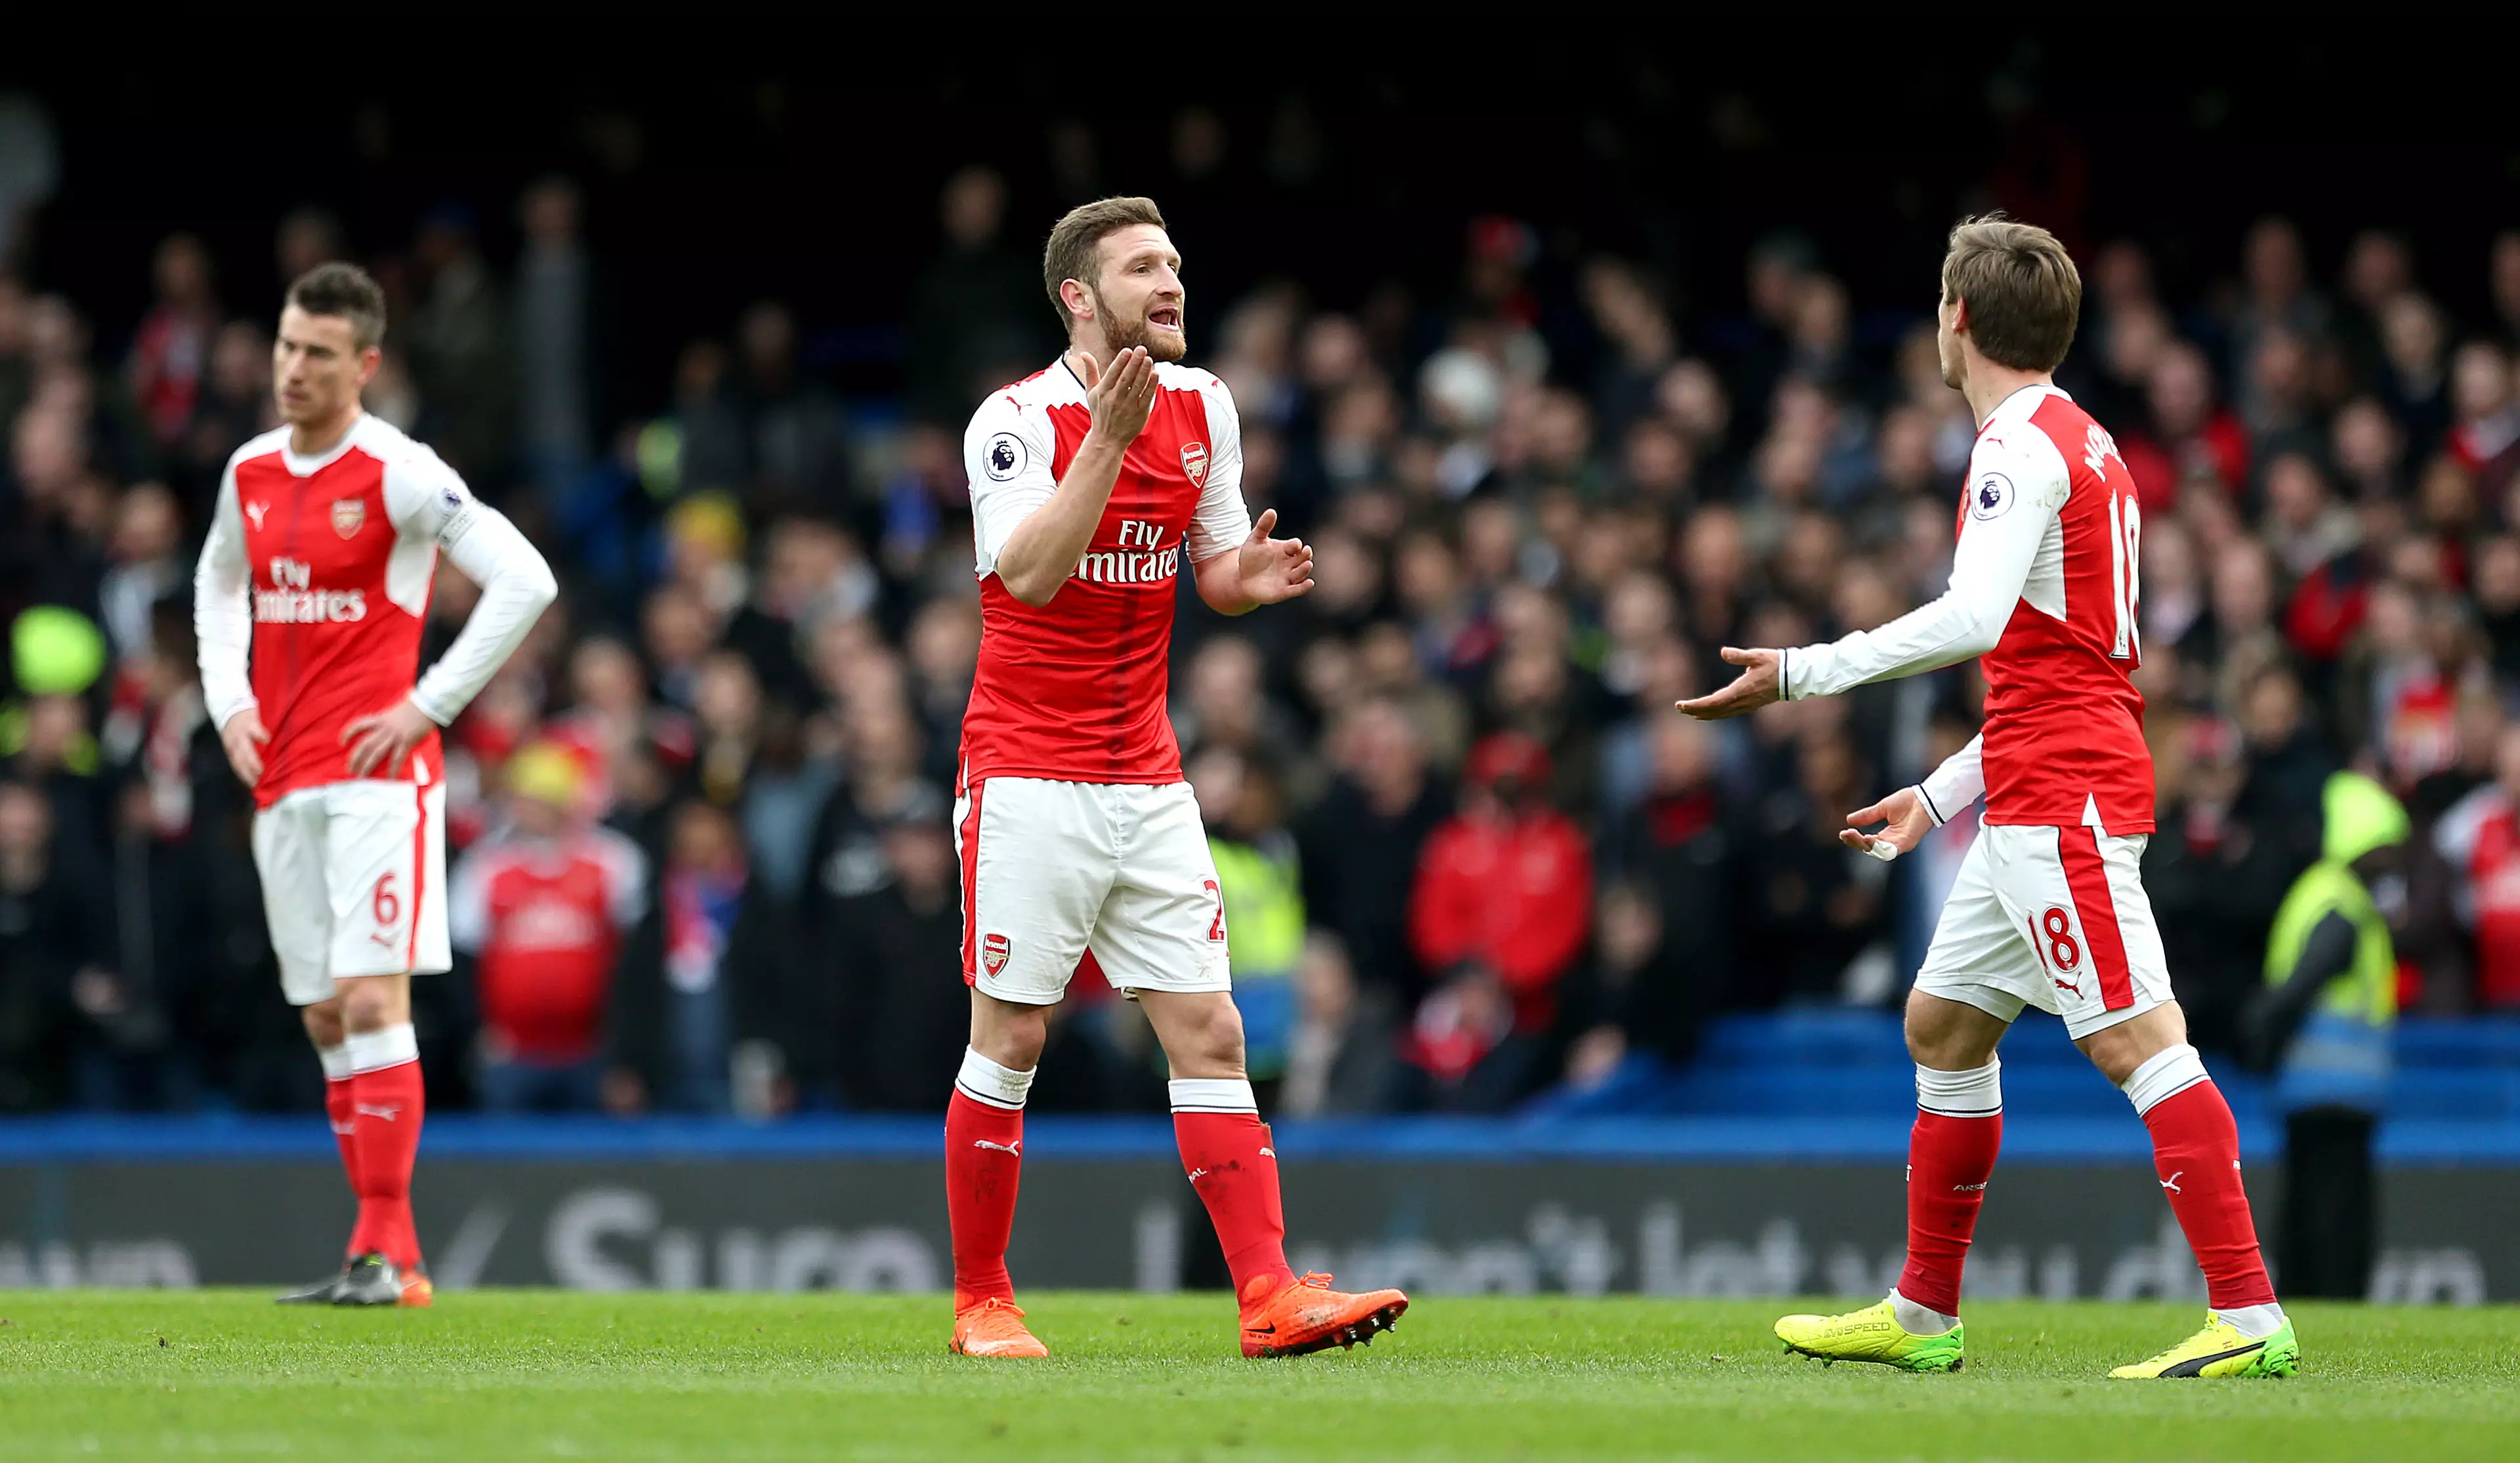 Arsenal's Mustafi's Latest Comments Have Left Everybody In Hysterics